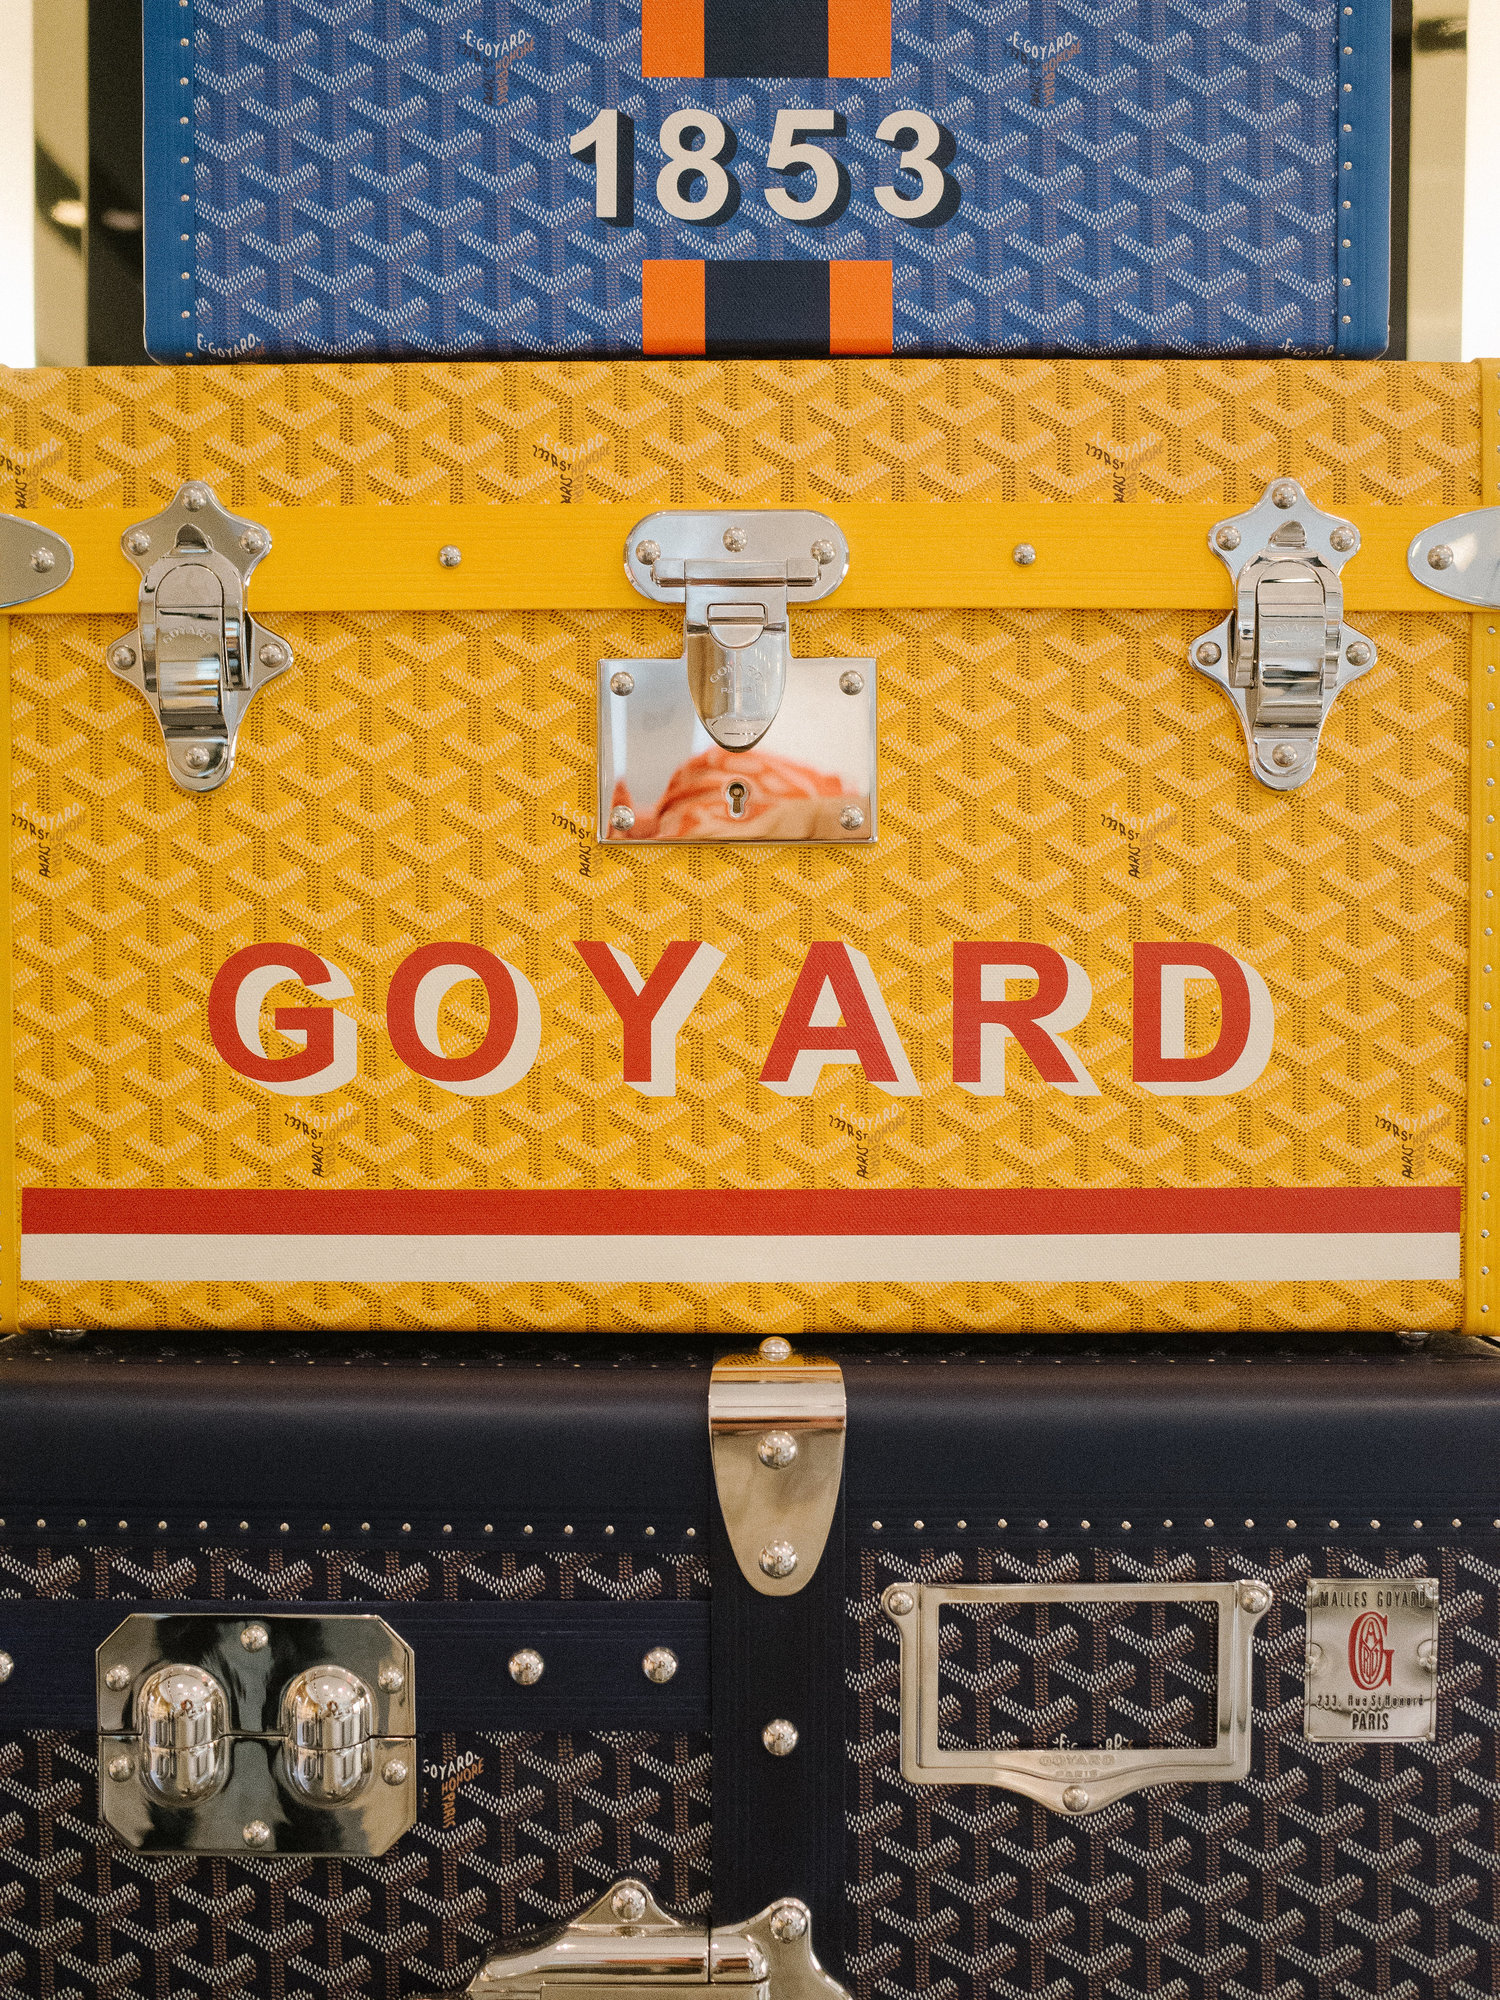 FridayFakeOut: Is this Goyard real or fake?, Retail Analyst